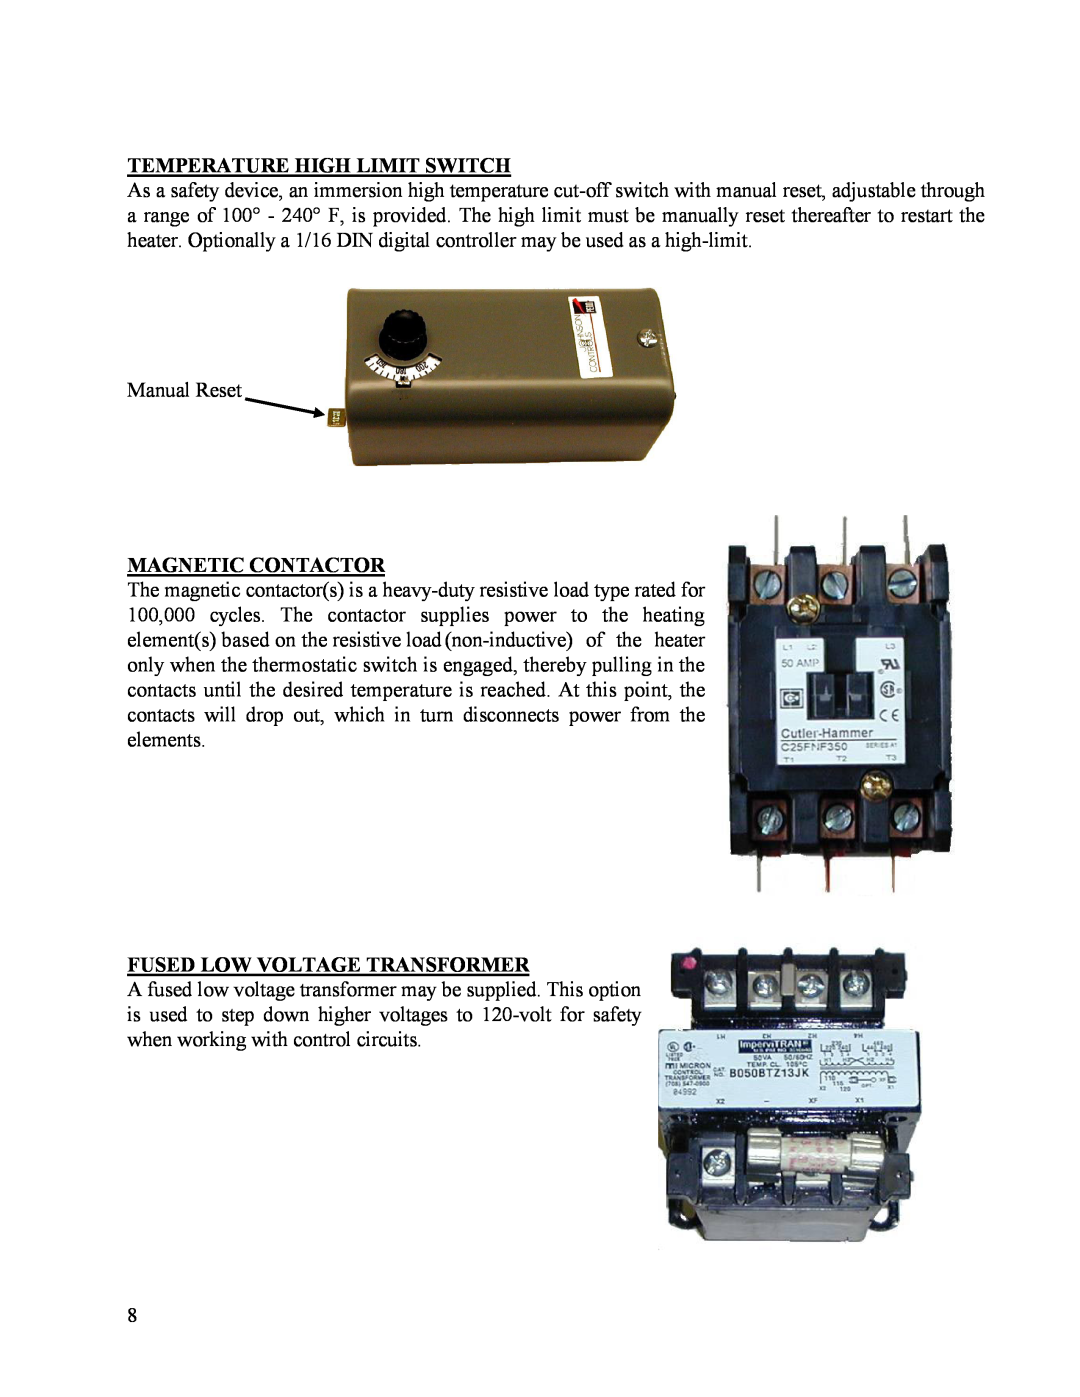 Hubbell CR manual Temperature High Limit Switch, Magnetic Contactor, Fused Low Voltage Transformer 